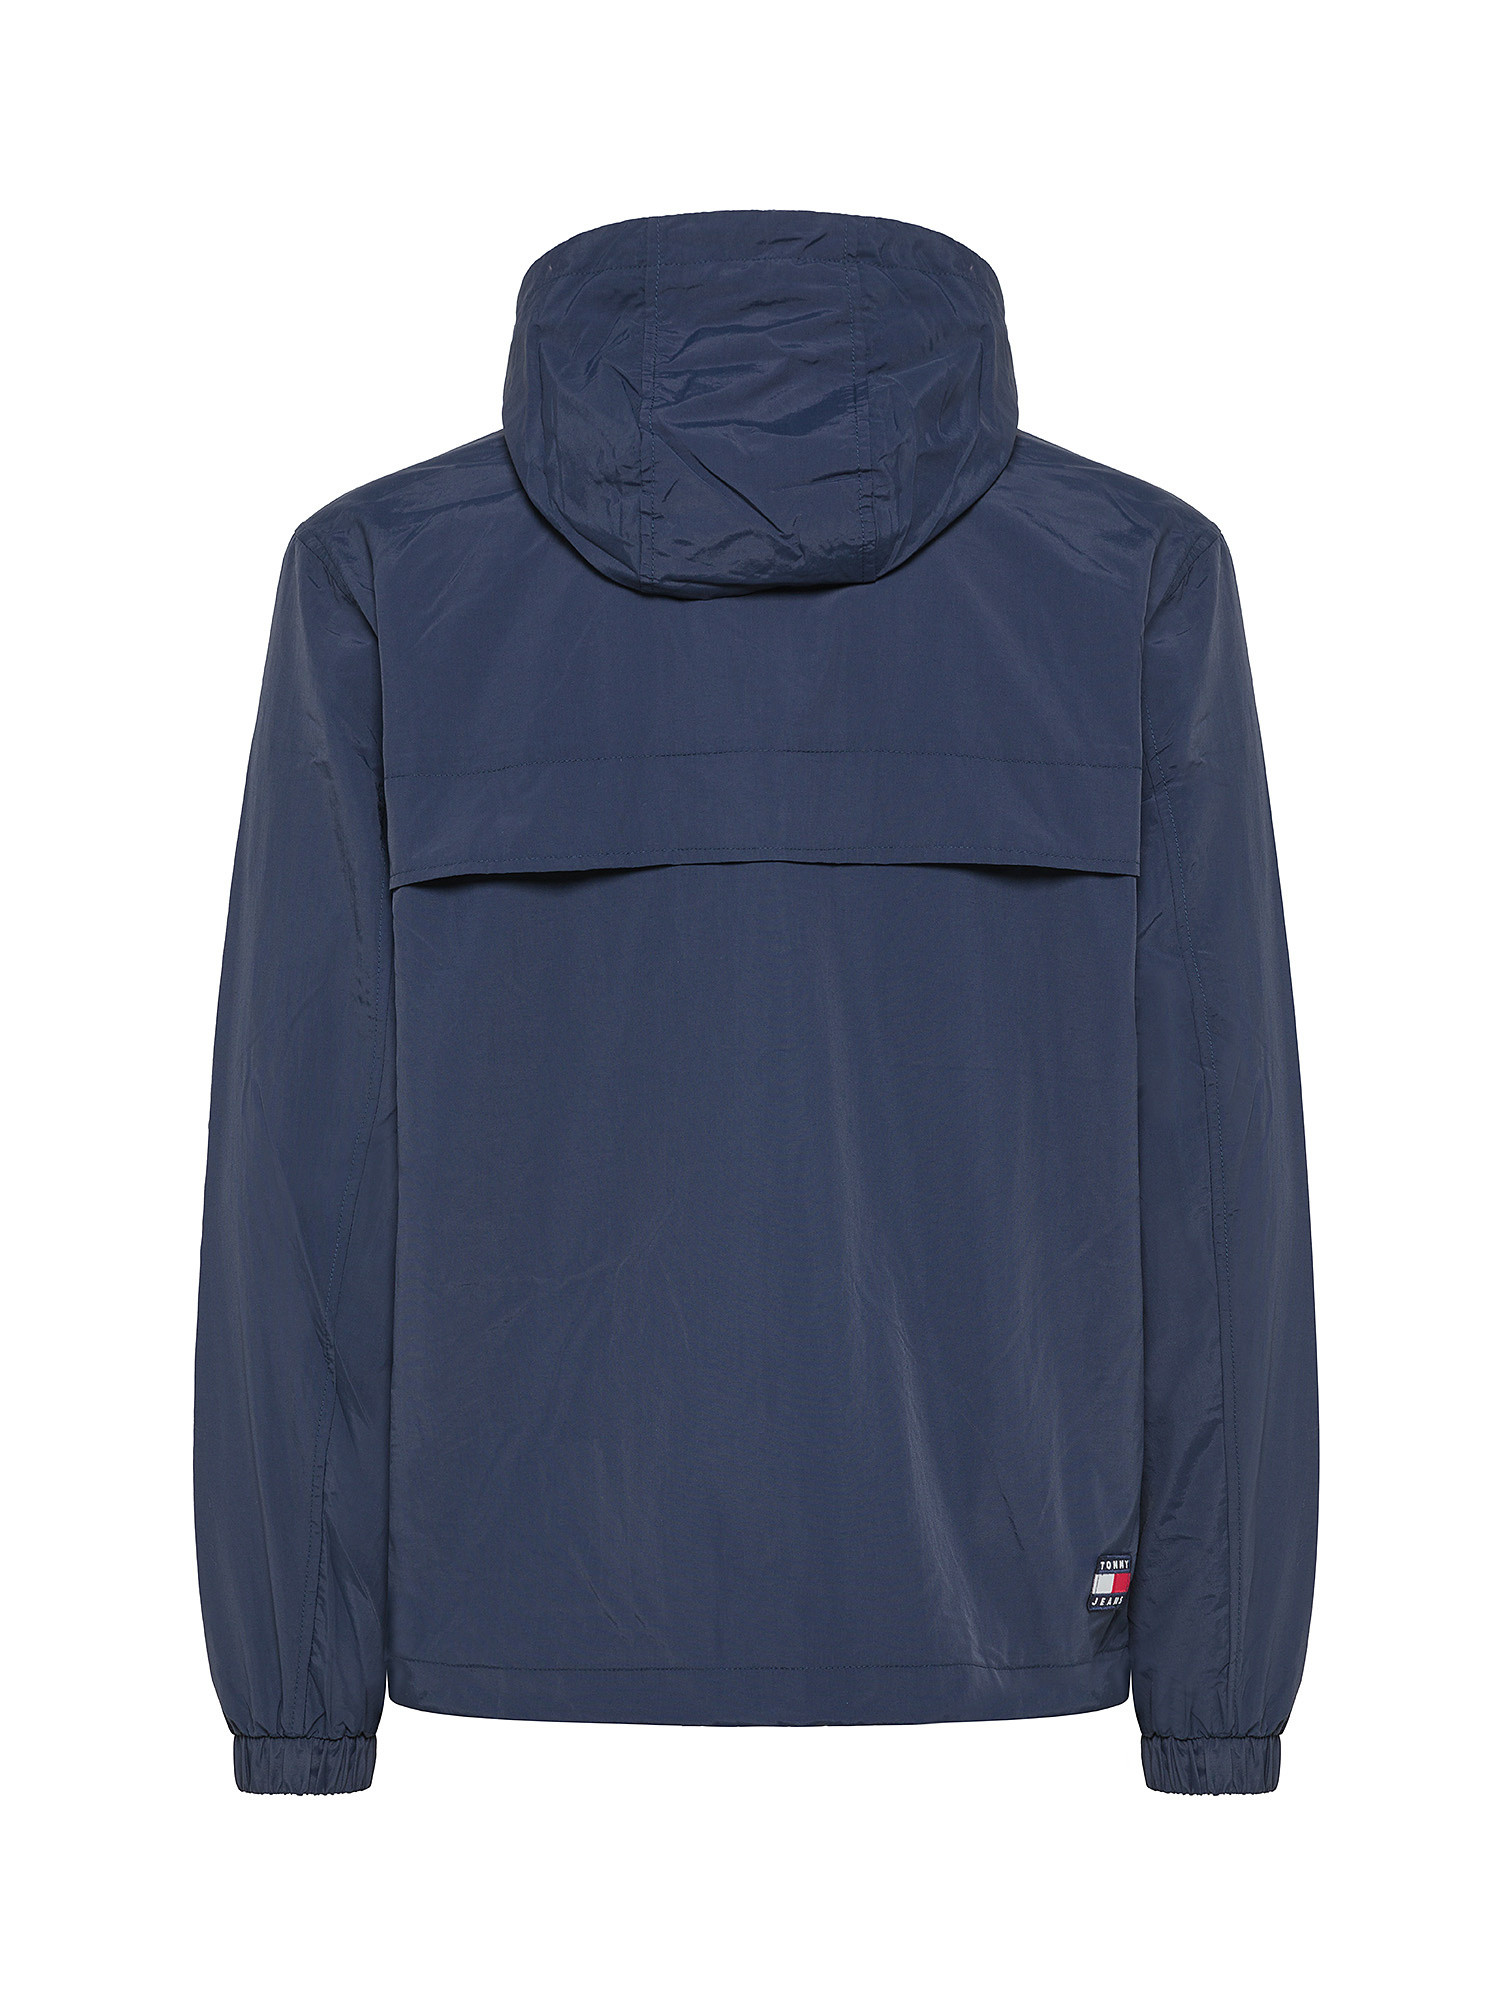 Tommy Jeans - Windbreaker with hood, Dark Blue, large image number 1